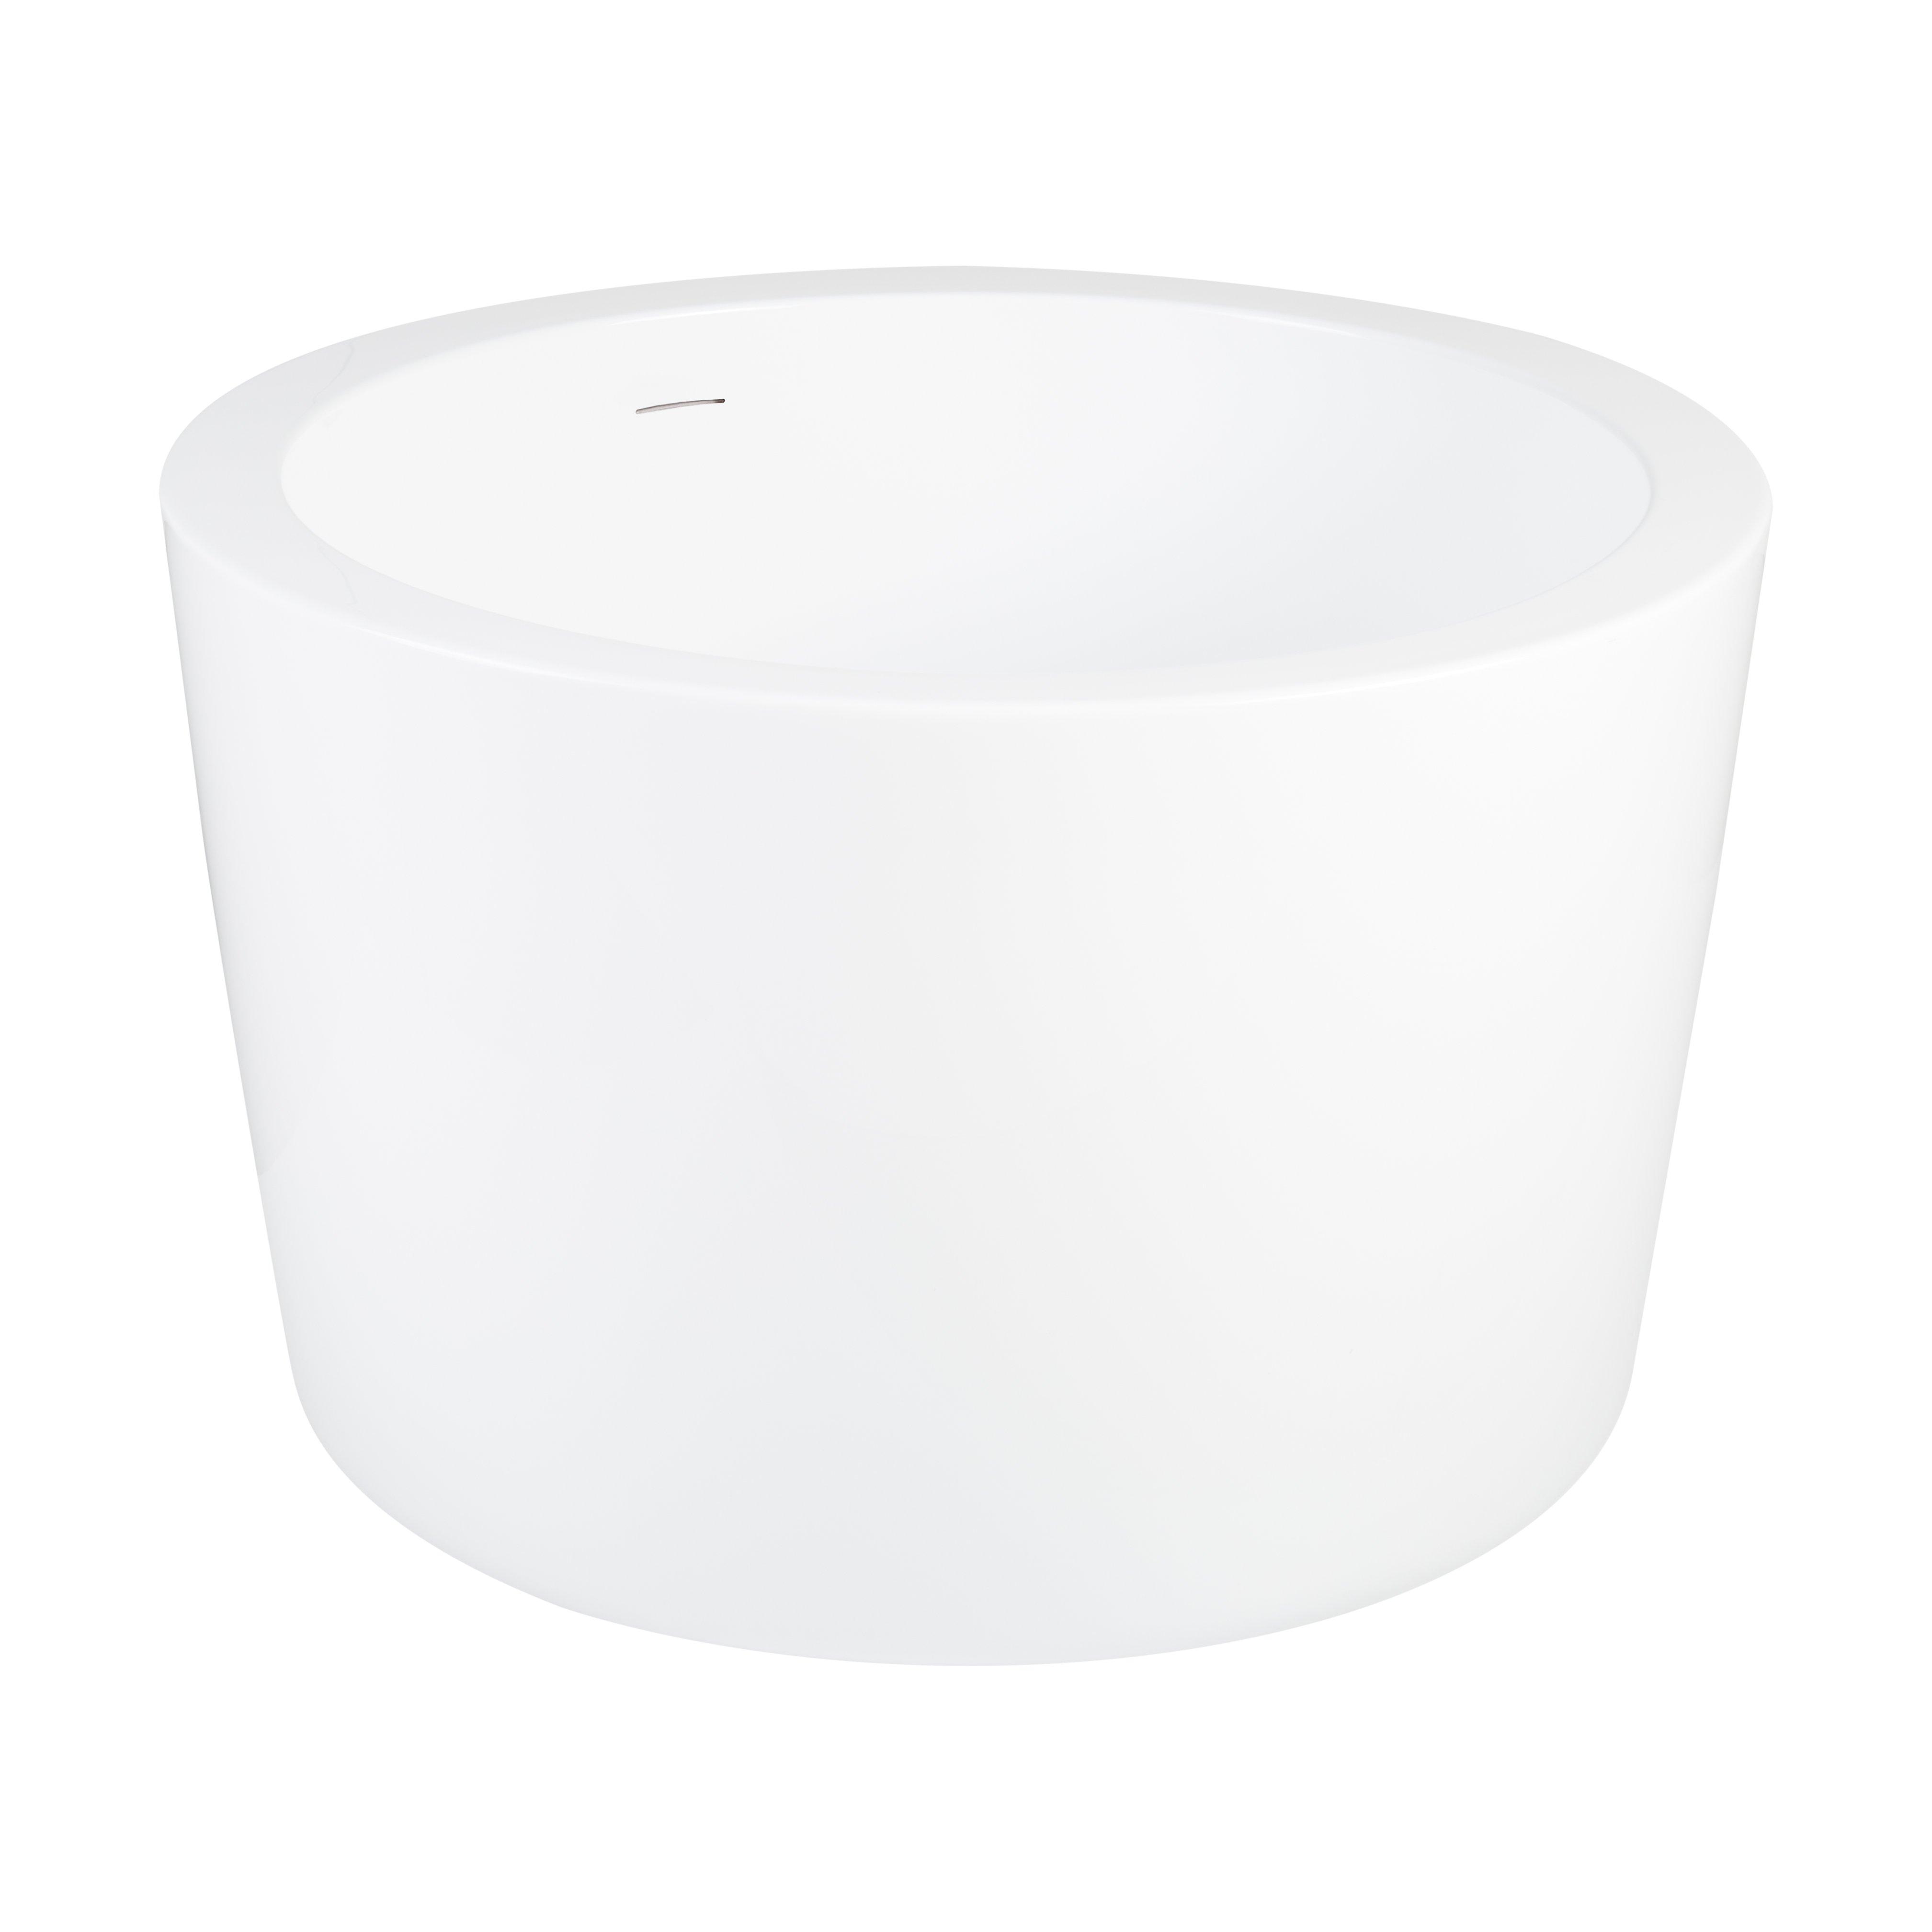 41 Siglo Round Japanese Soaking Tub with Slotted Overflow